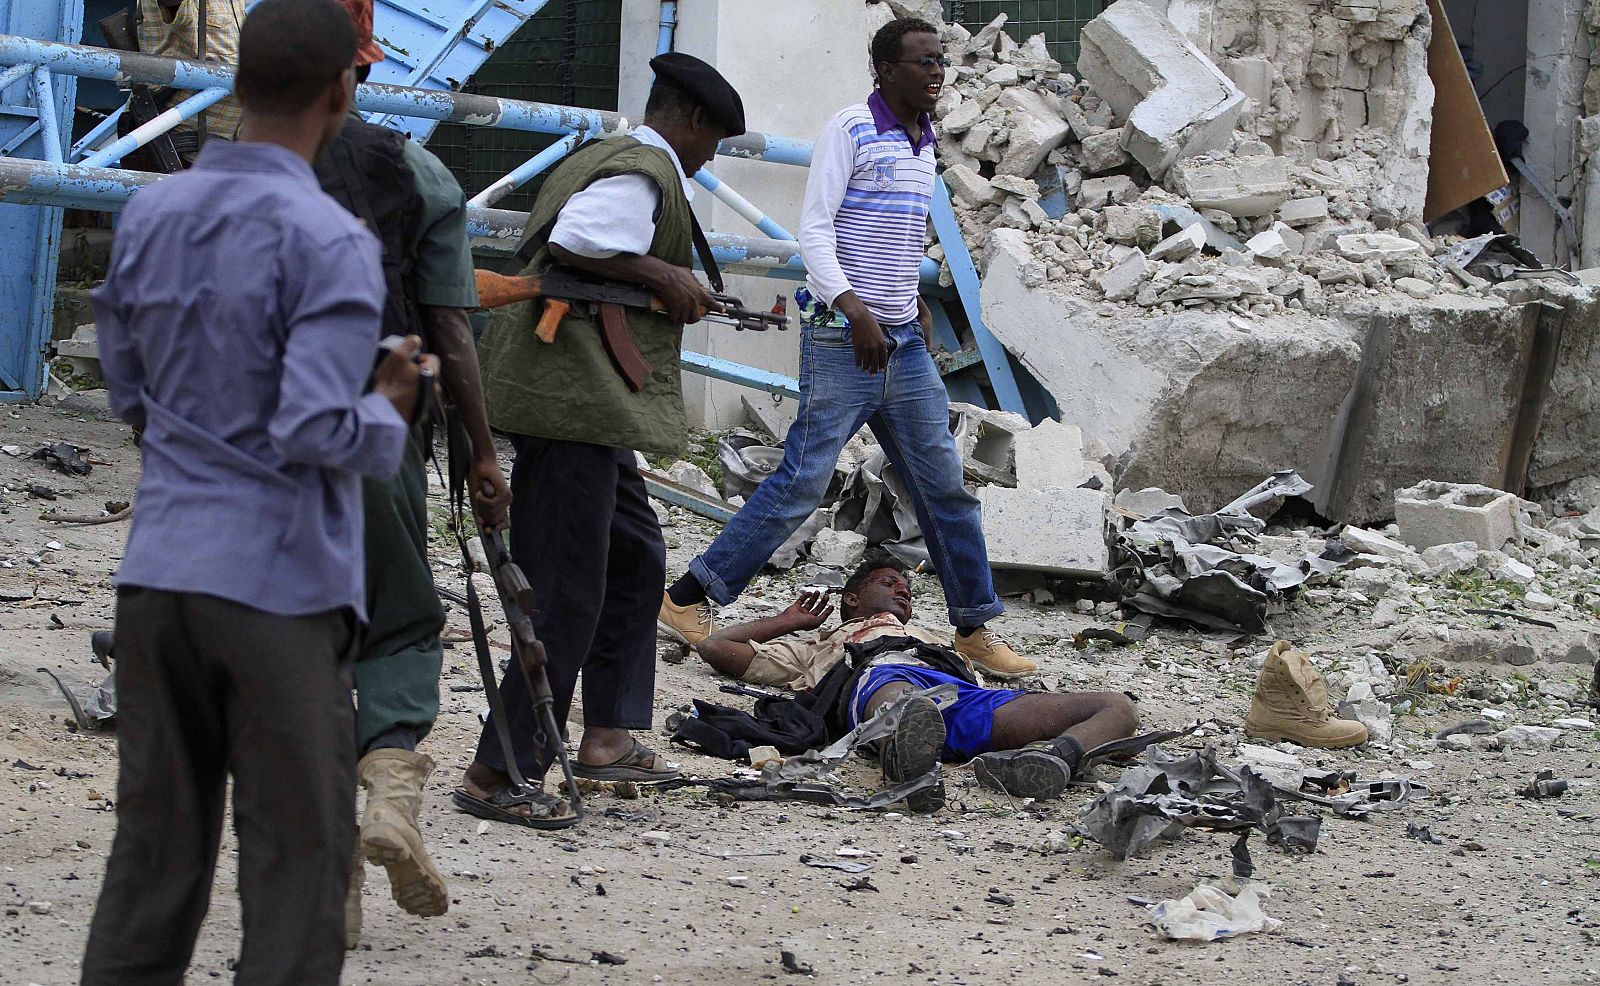 Somali government soldiers stand near injured man after suicide bomb attack inside the United Nations compound in the Somali capital Mogadishu